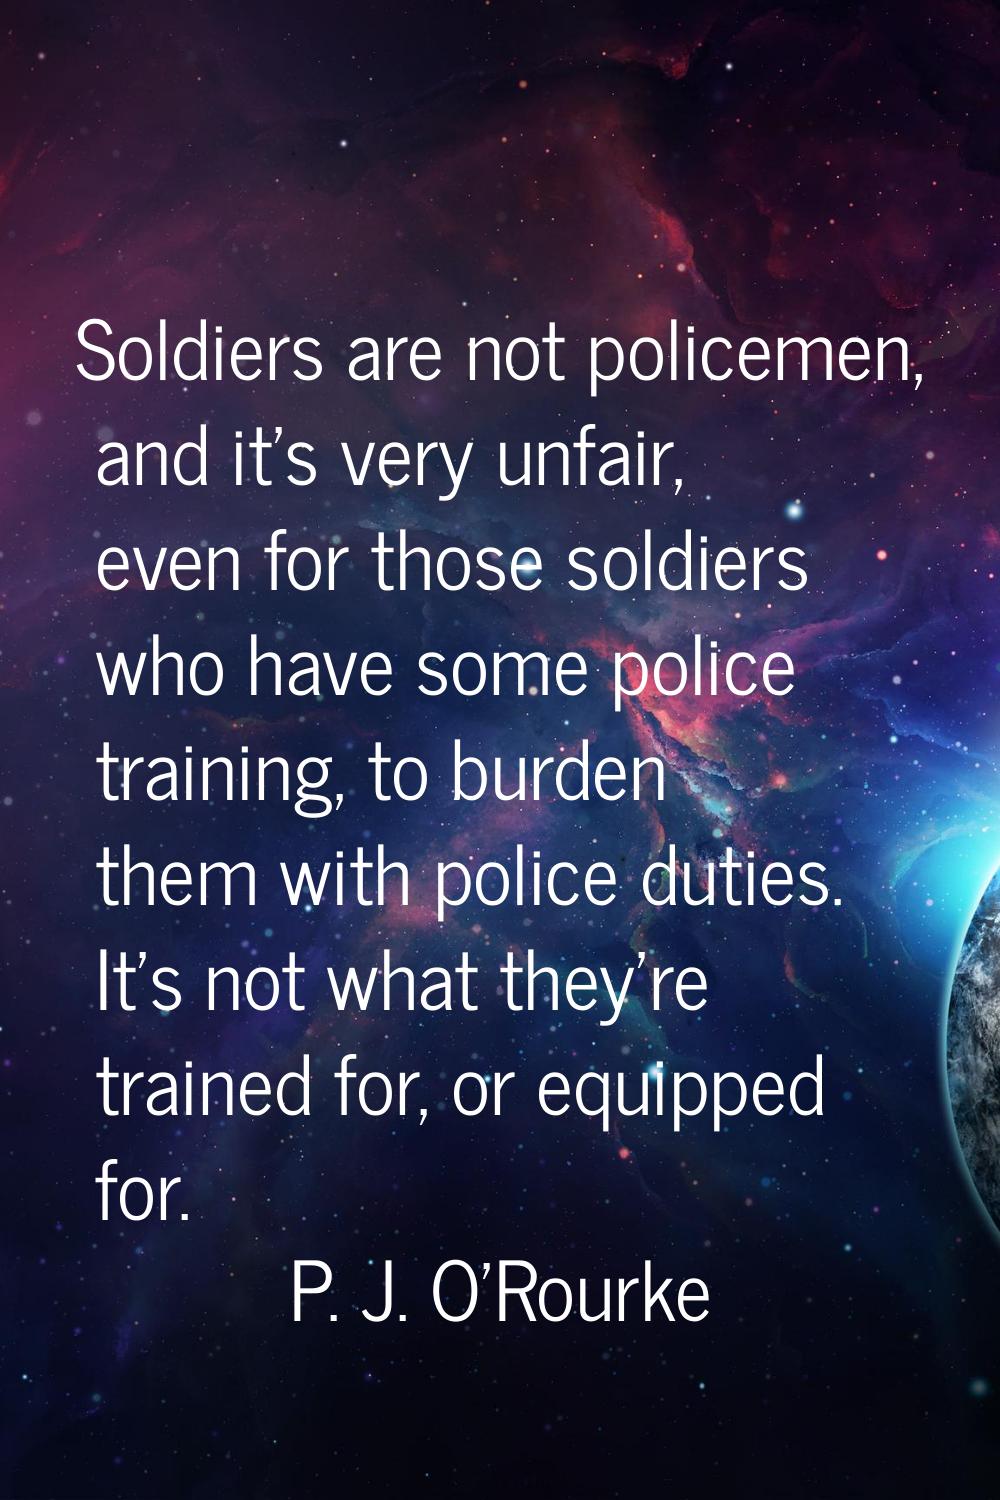 Soldiers are not policemen, and it's very unfair, even for those soldiers who have some police trai